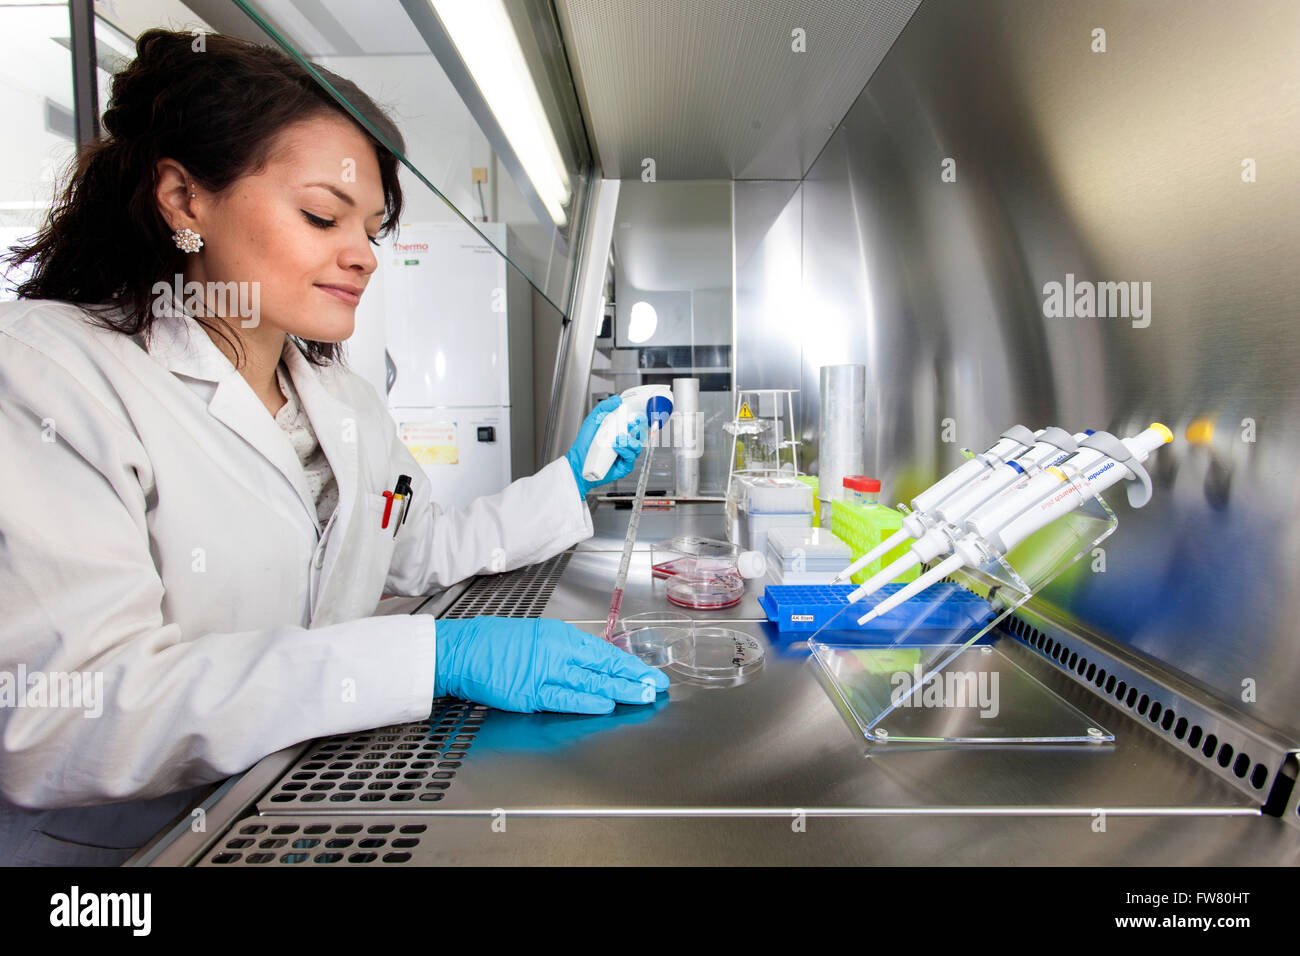 Scientist in a laboratory during pipetting. Stock Photo